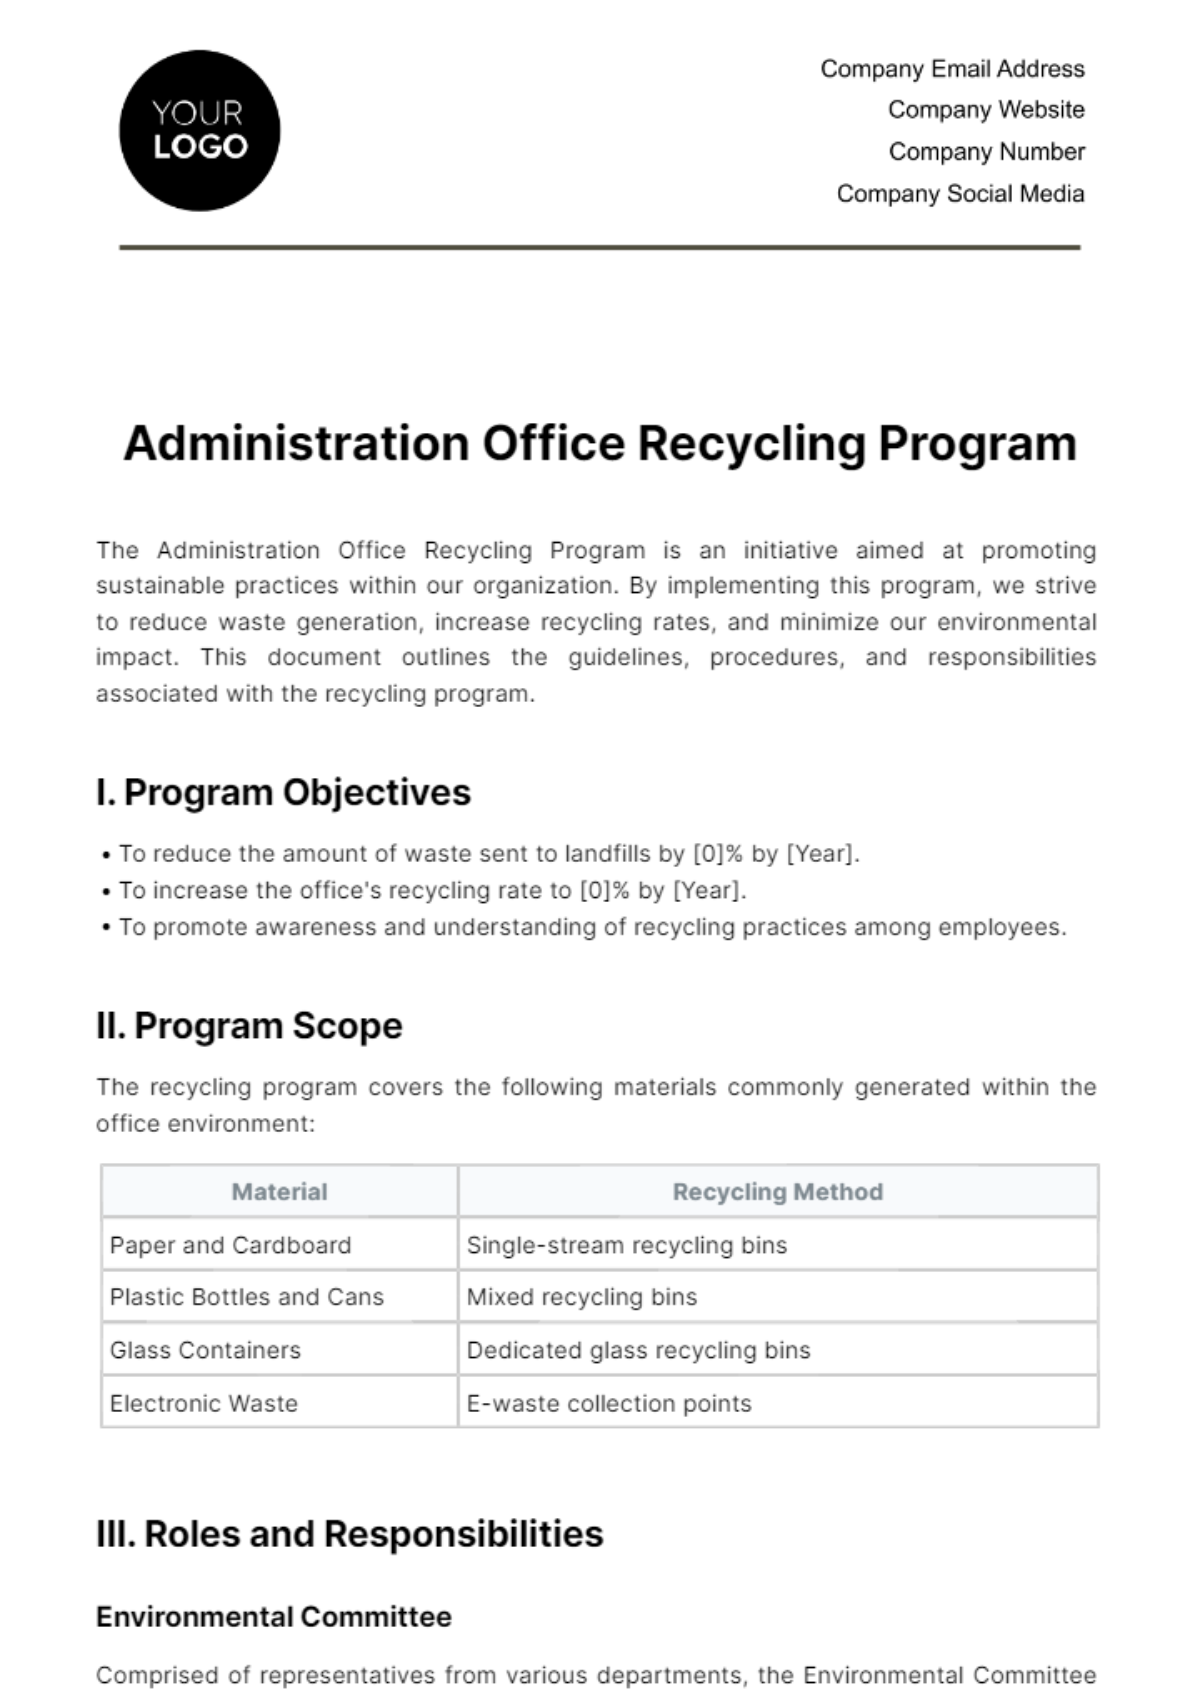 Administration Office Recycling Program Template